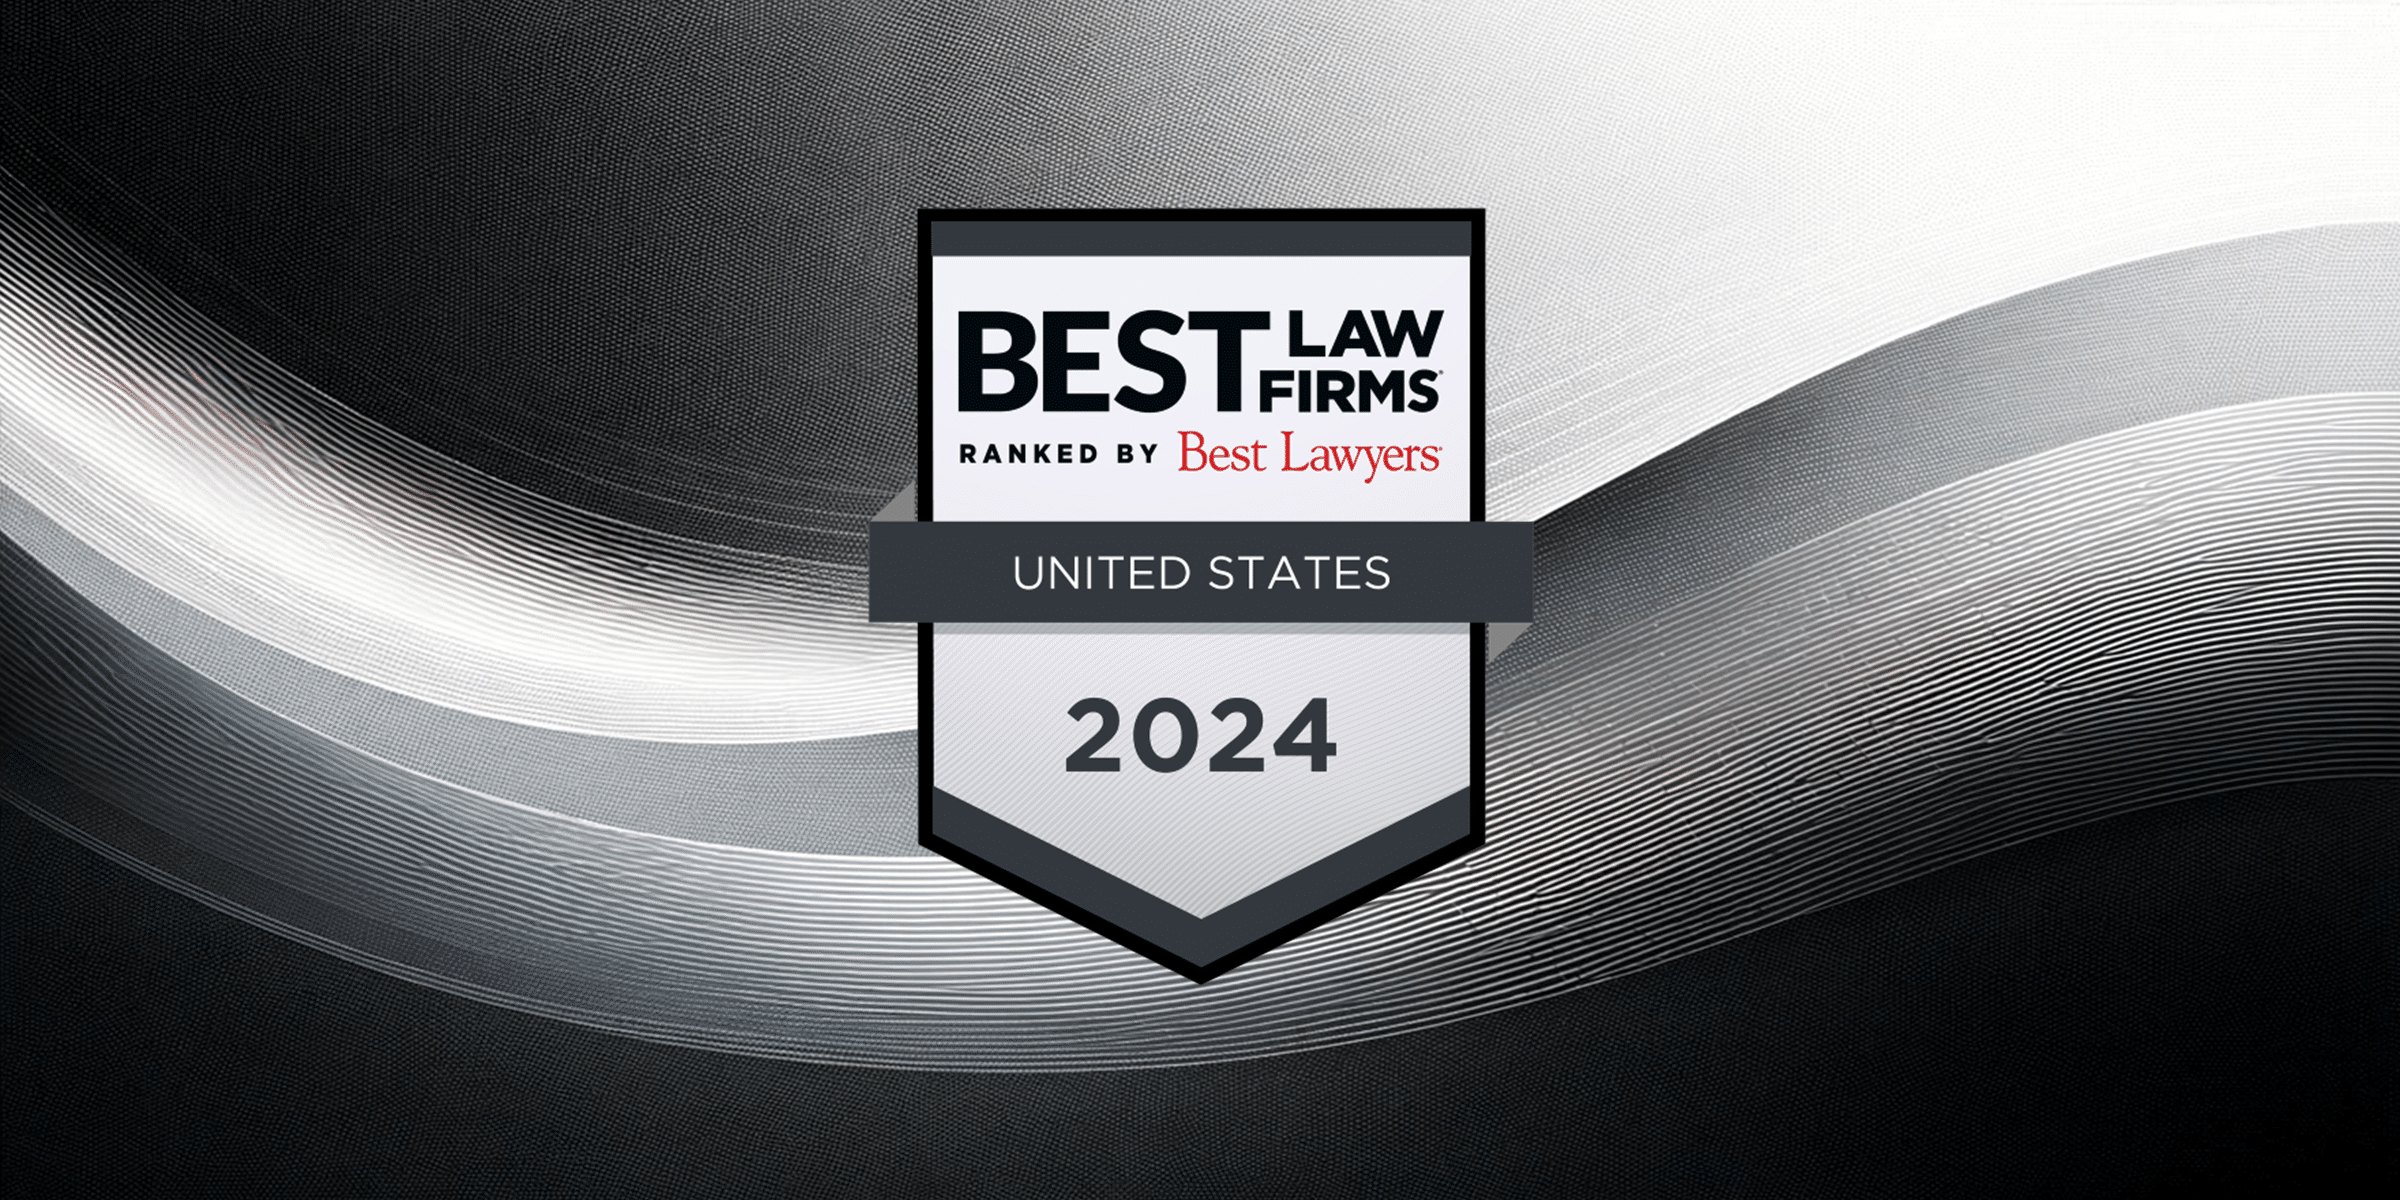 Chain | Cohn | Clark Selected For 2024 ‘Best Law Firms’ Rankings List, The Sole Kern County Firm Chosen